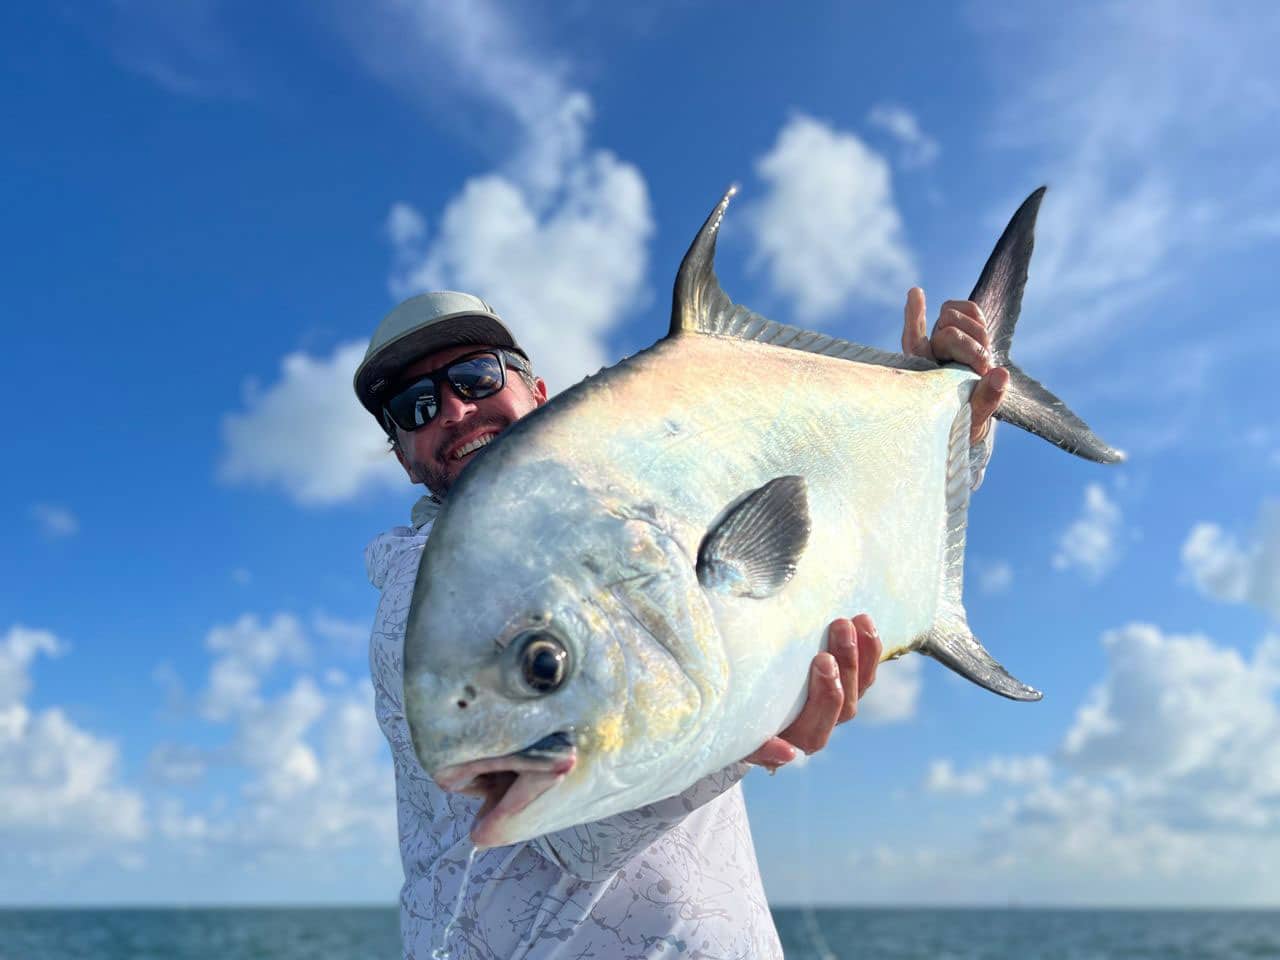 How to Fish for Permit: Best Baits, Spots & Tactics - Florida Sportsman